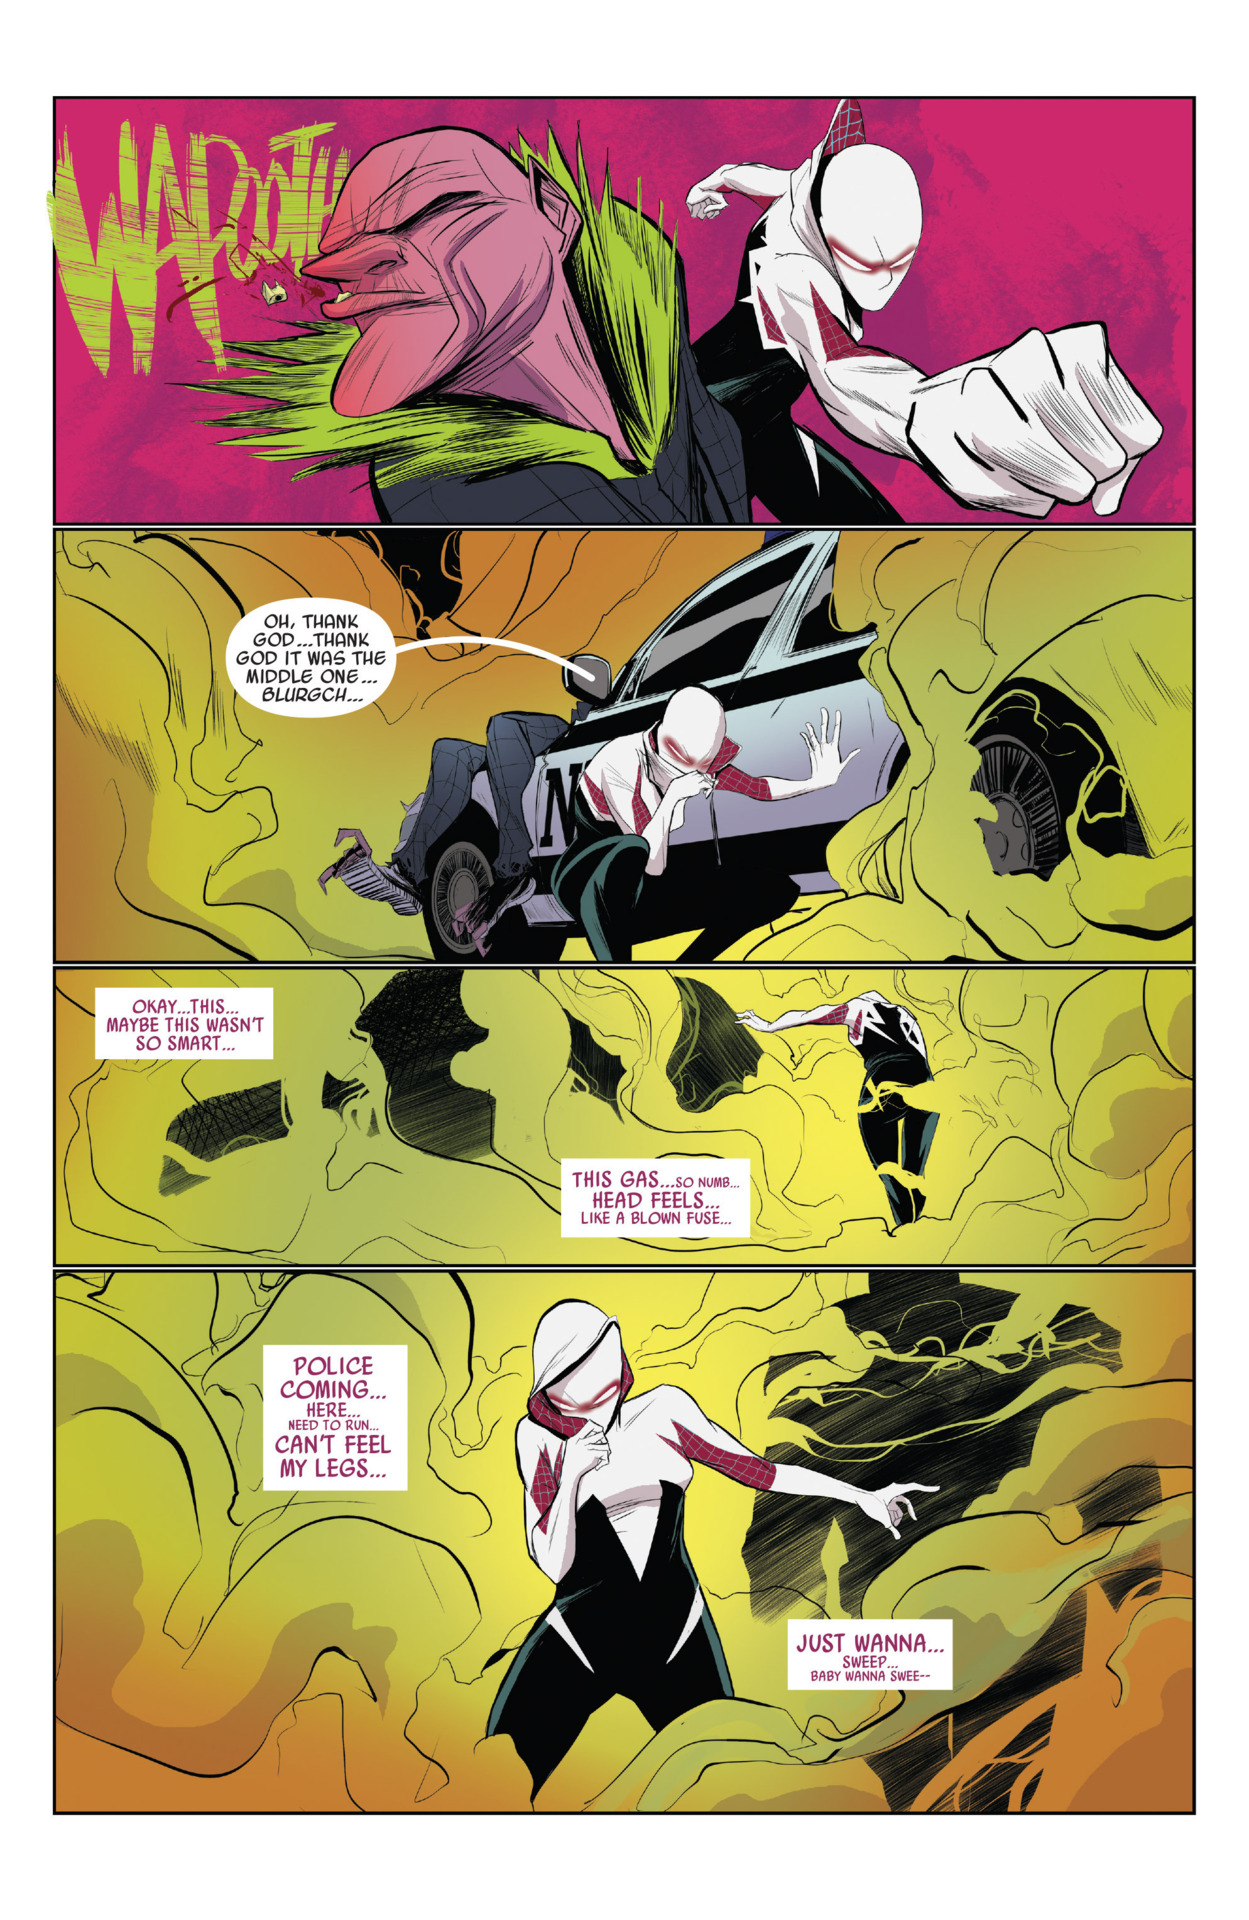 Vulture is defeated by Spider-Gwen amidst the dangerous fumes he was emitting - Spider-Gwen: Vol. 0